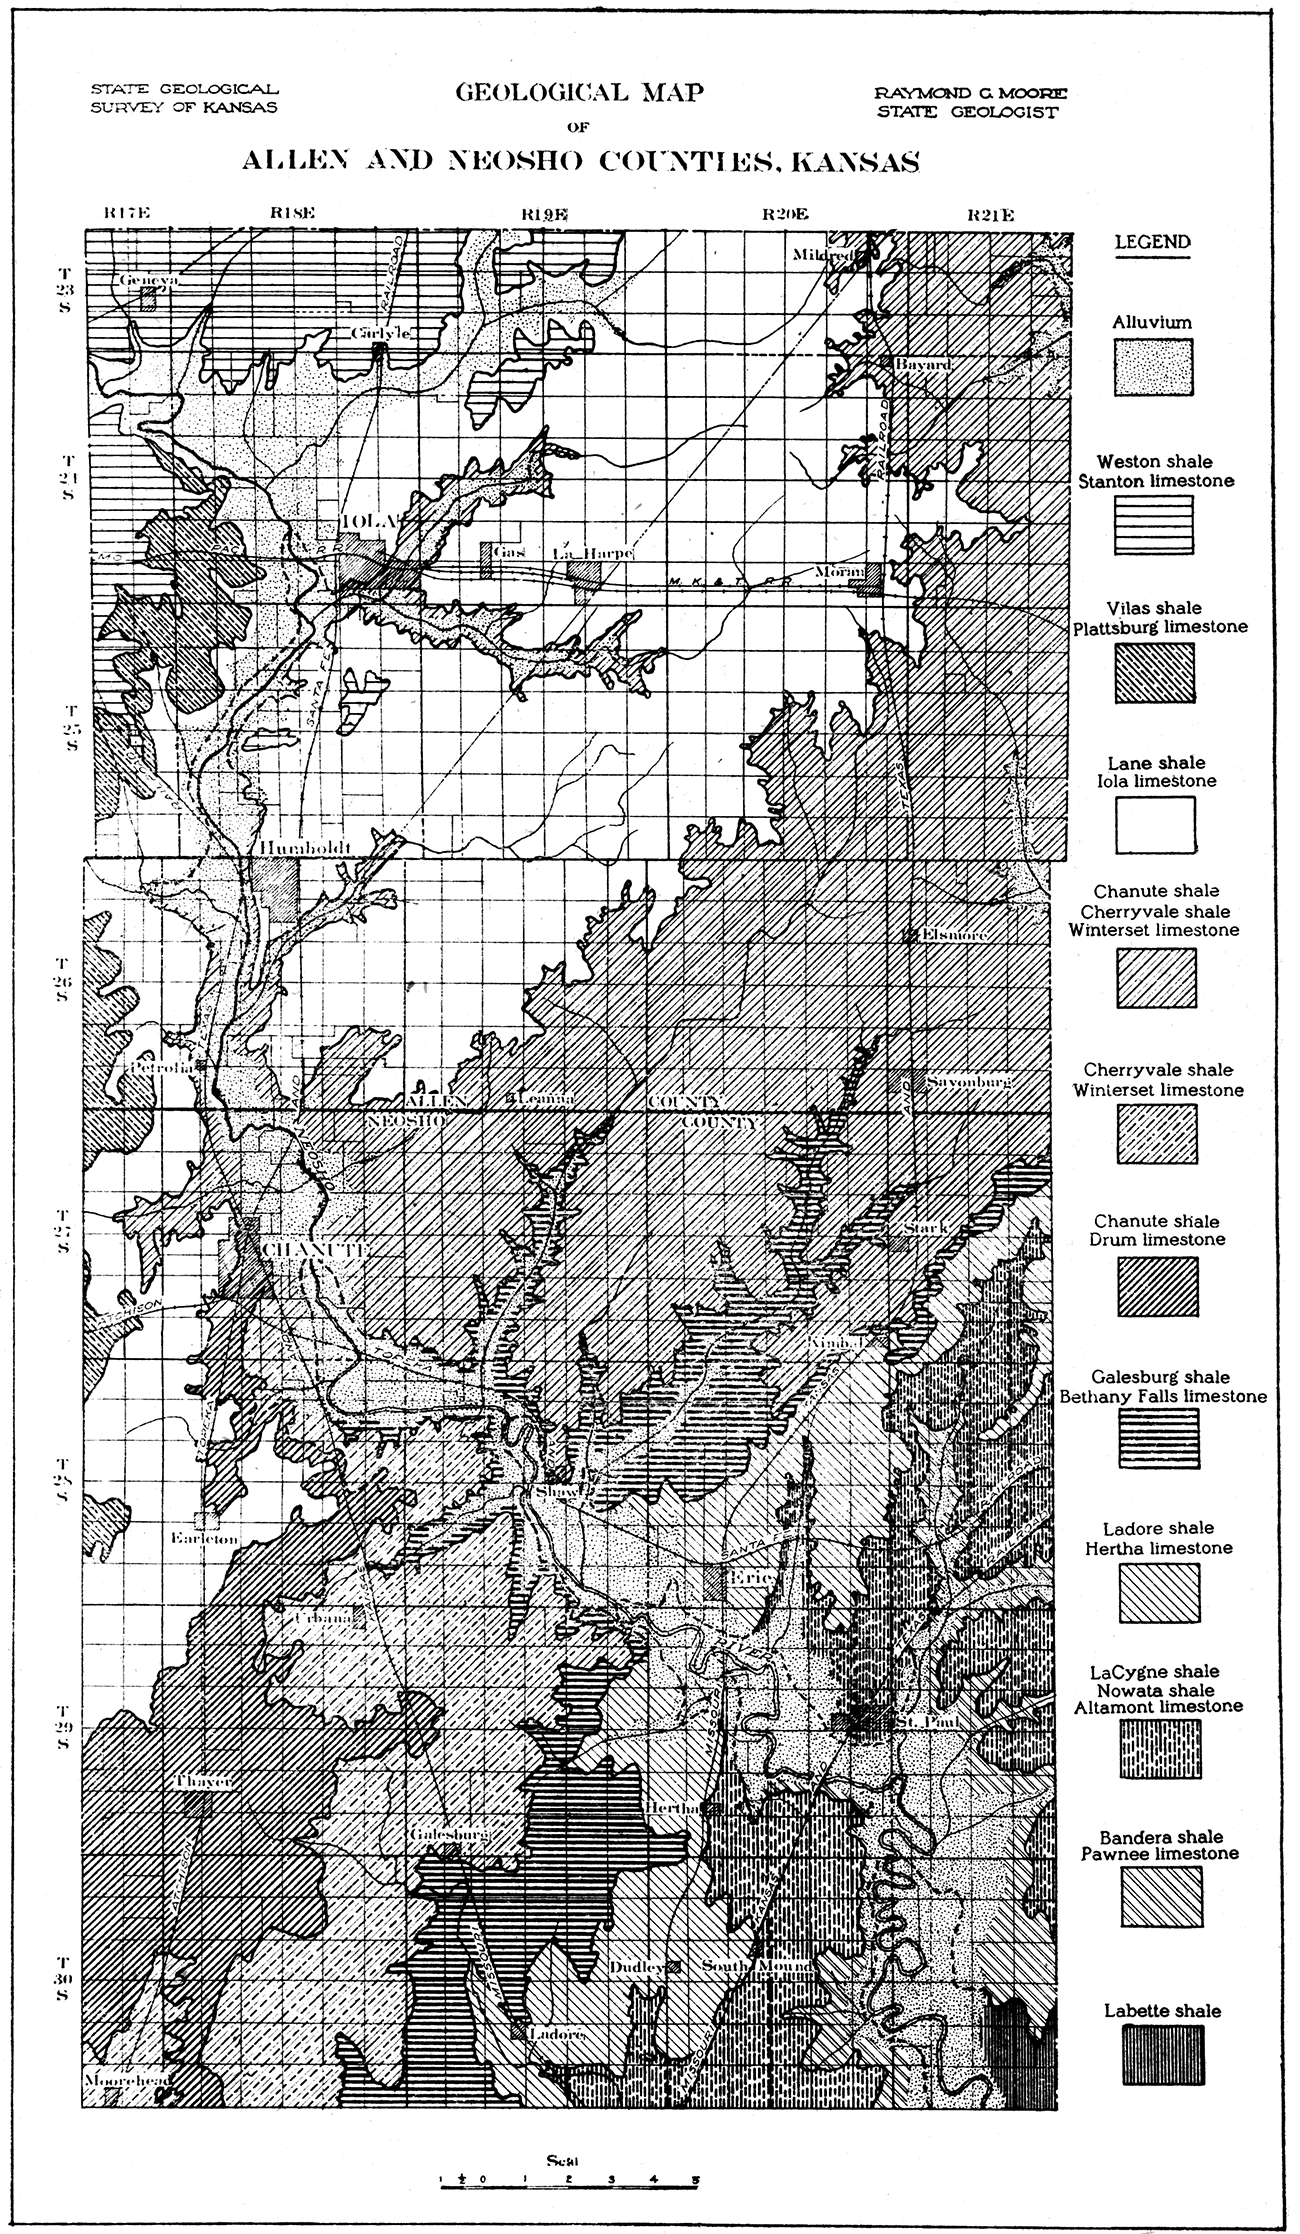 Geologic map of Allen and Neosho counties, Kansas.